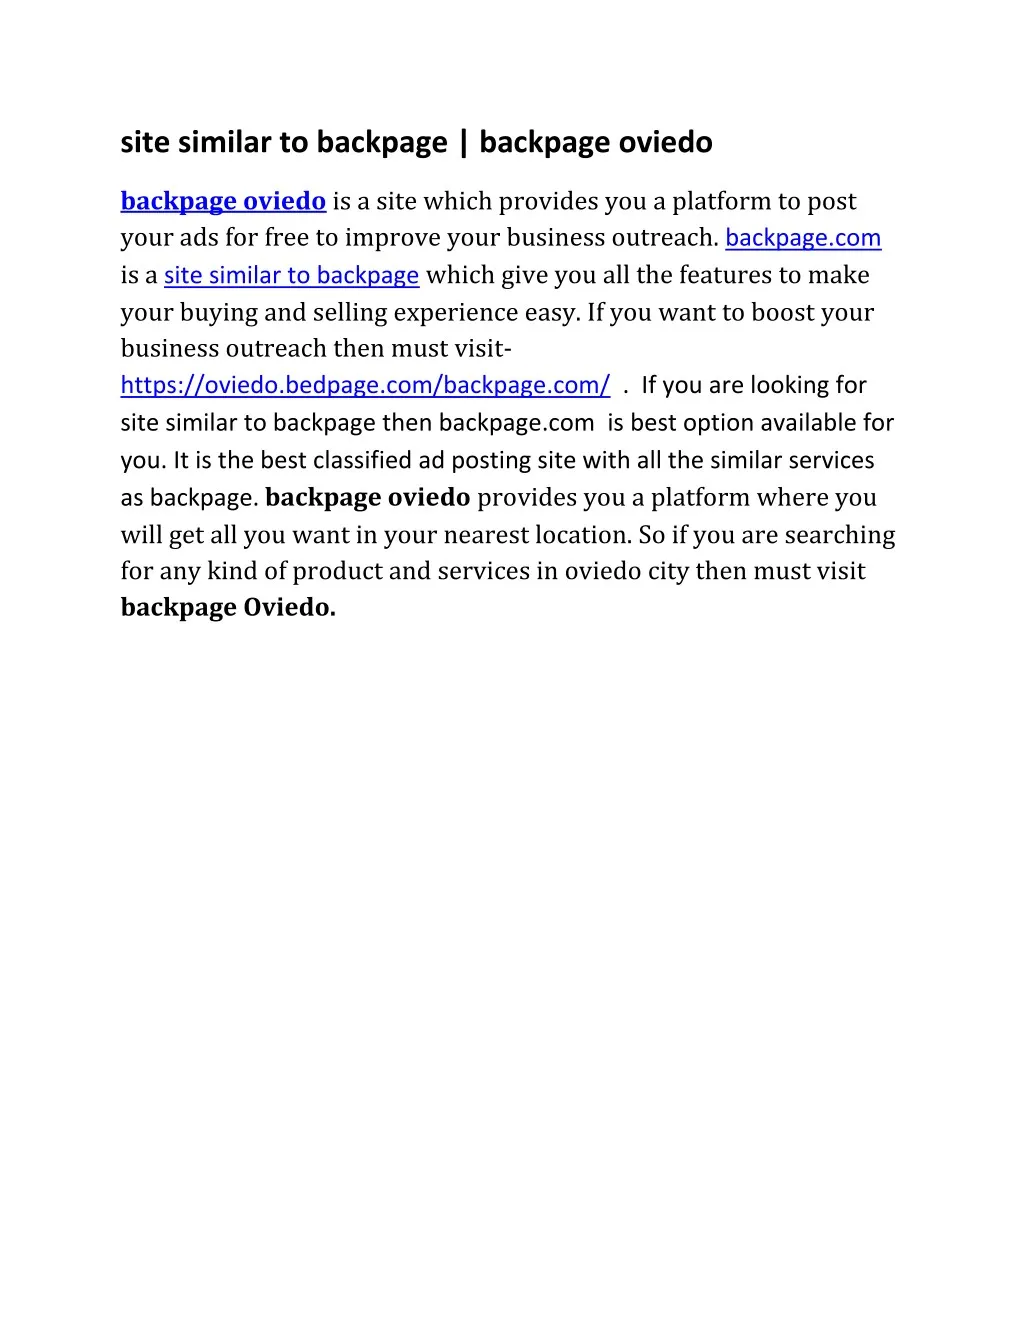 site similar to backpage backpage oviedo